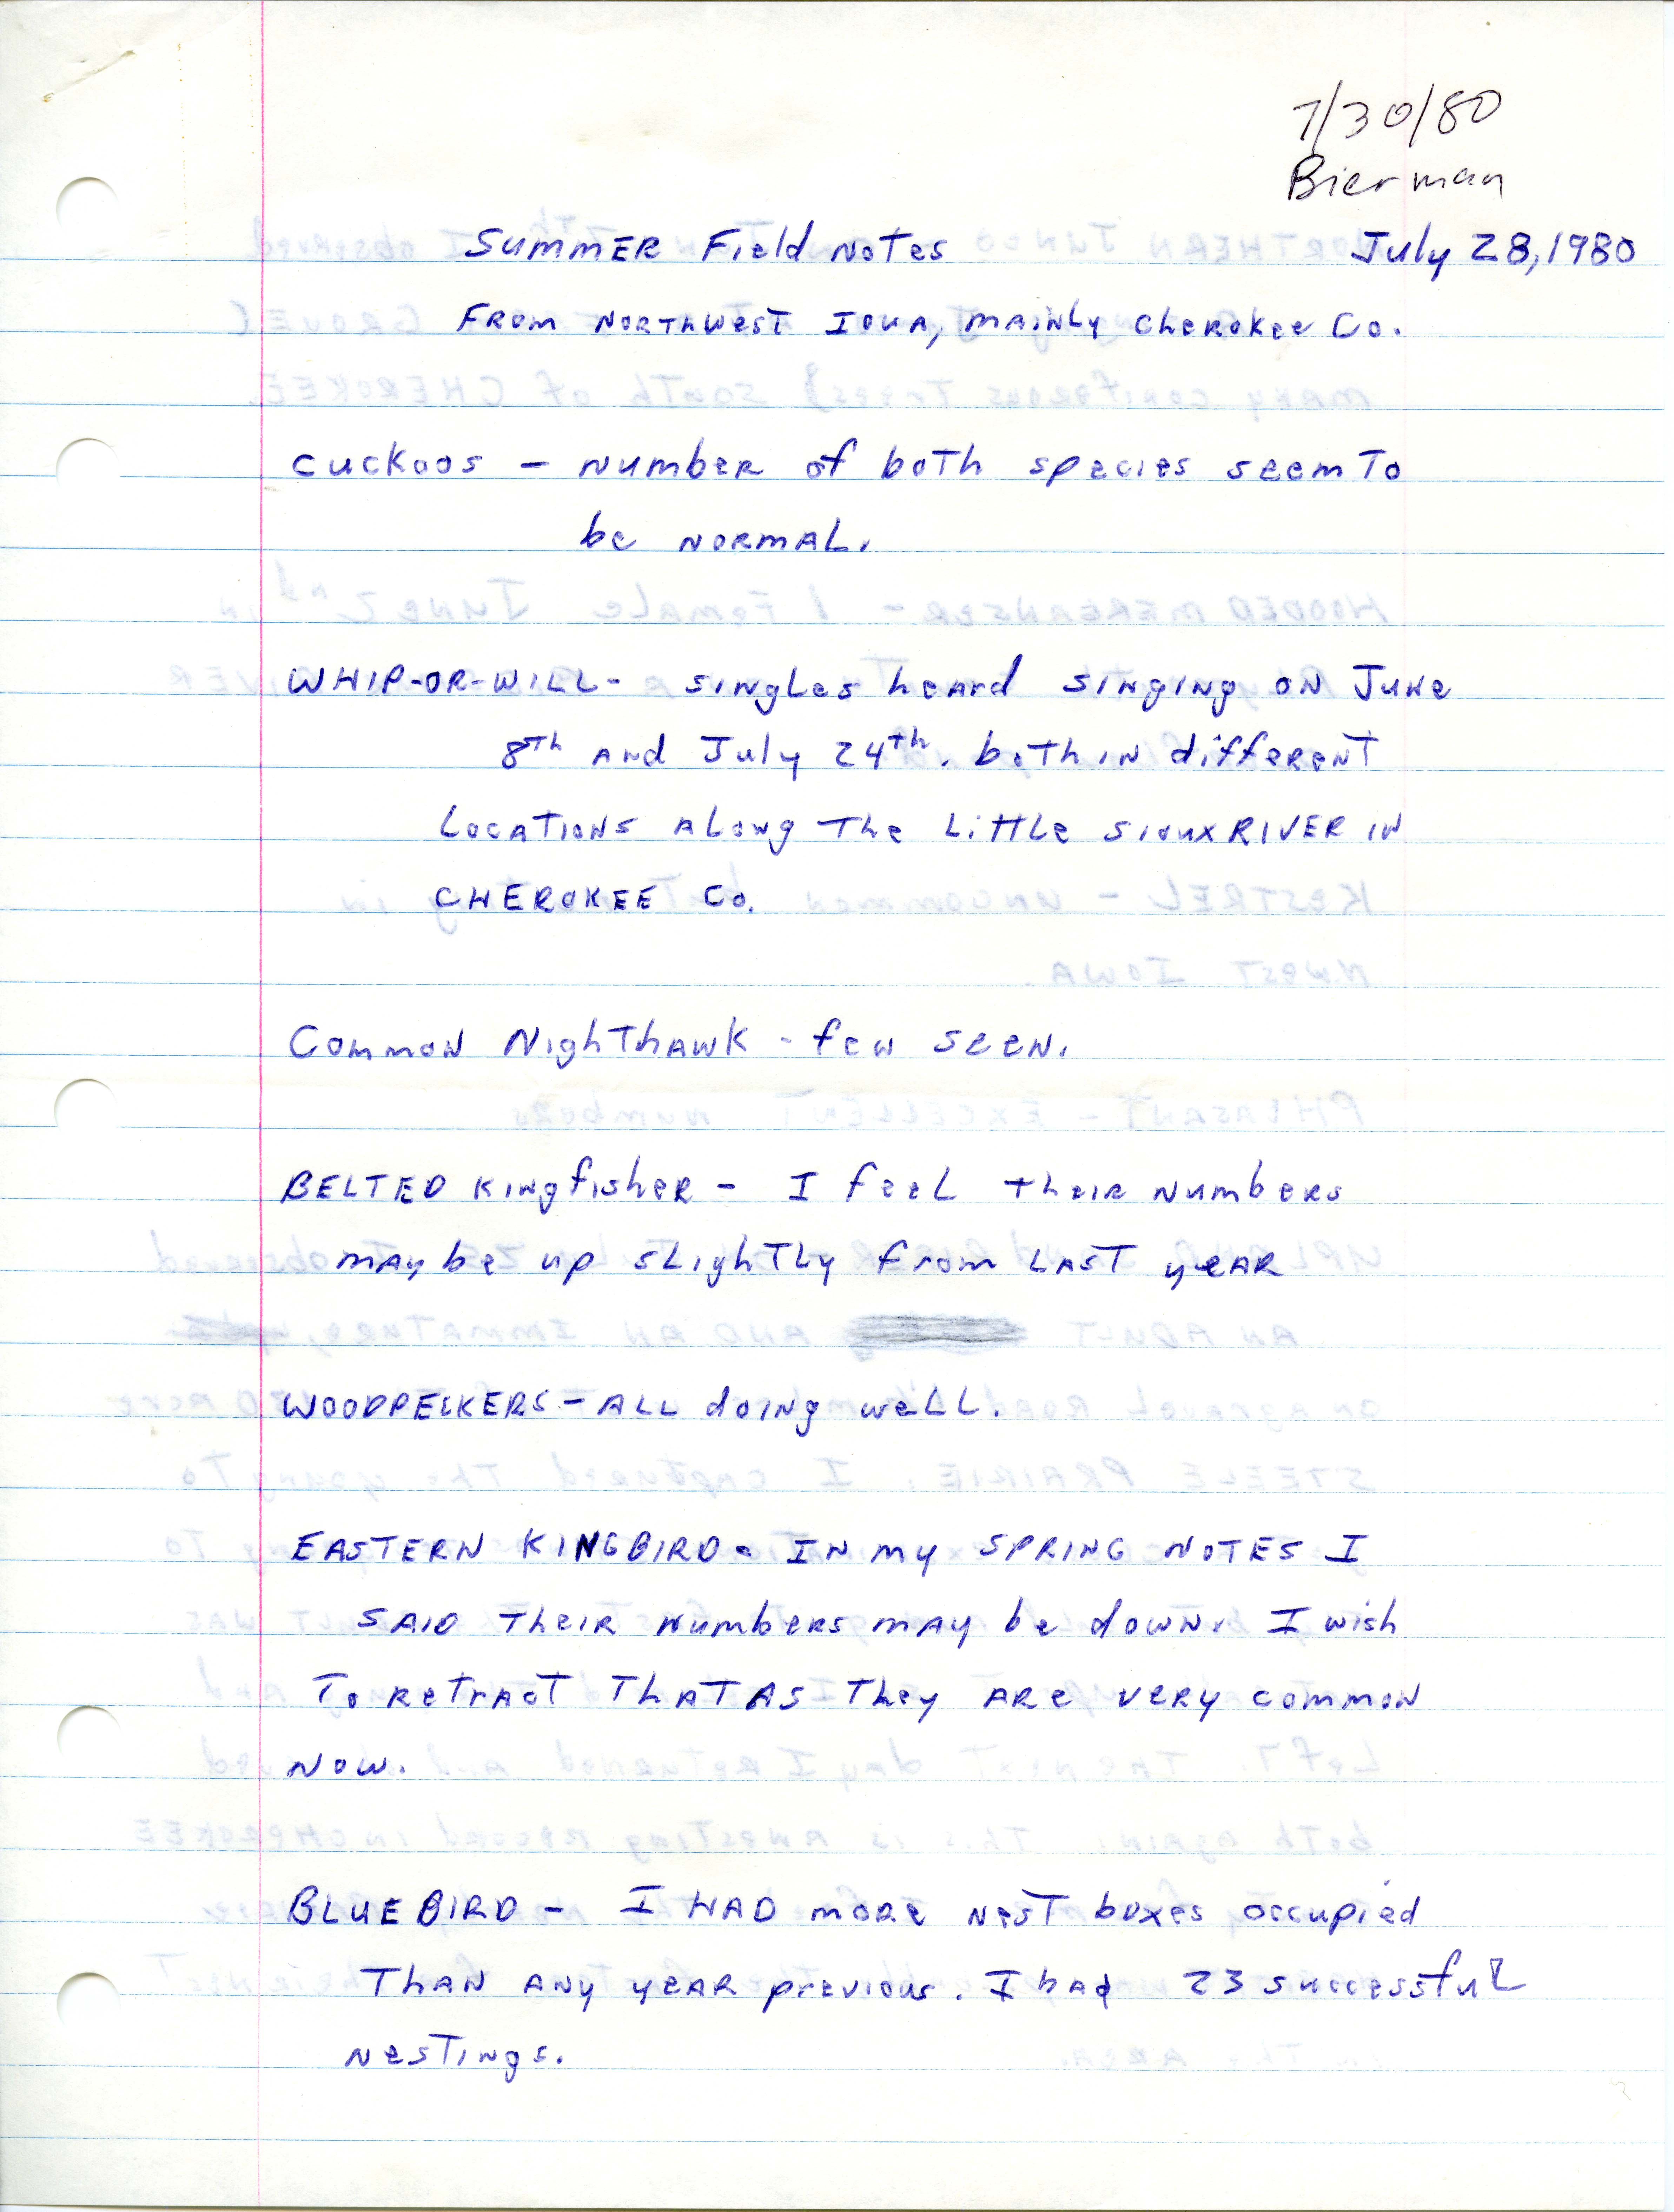 Field notes contributed by Dick Bierman, July 28, 1980